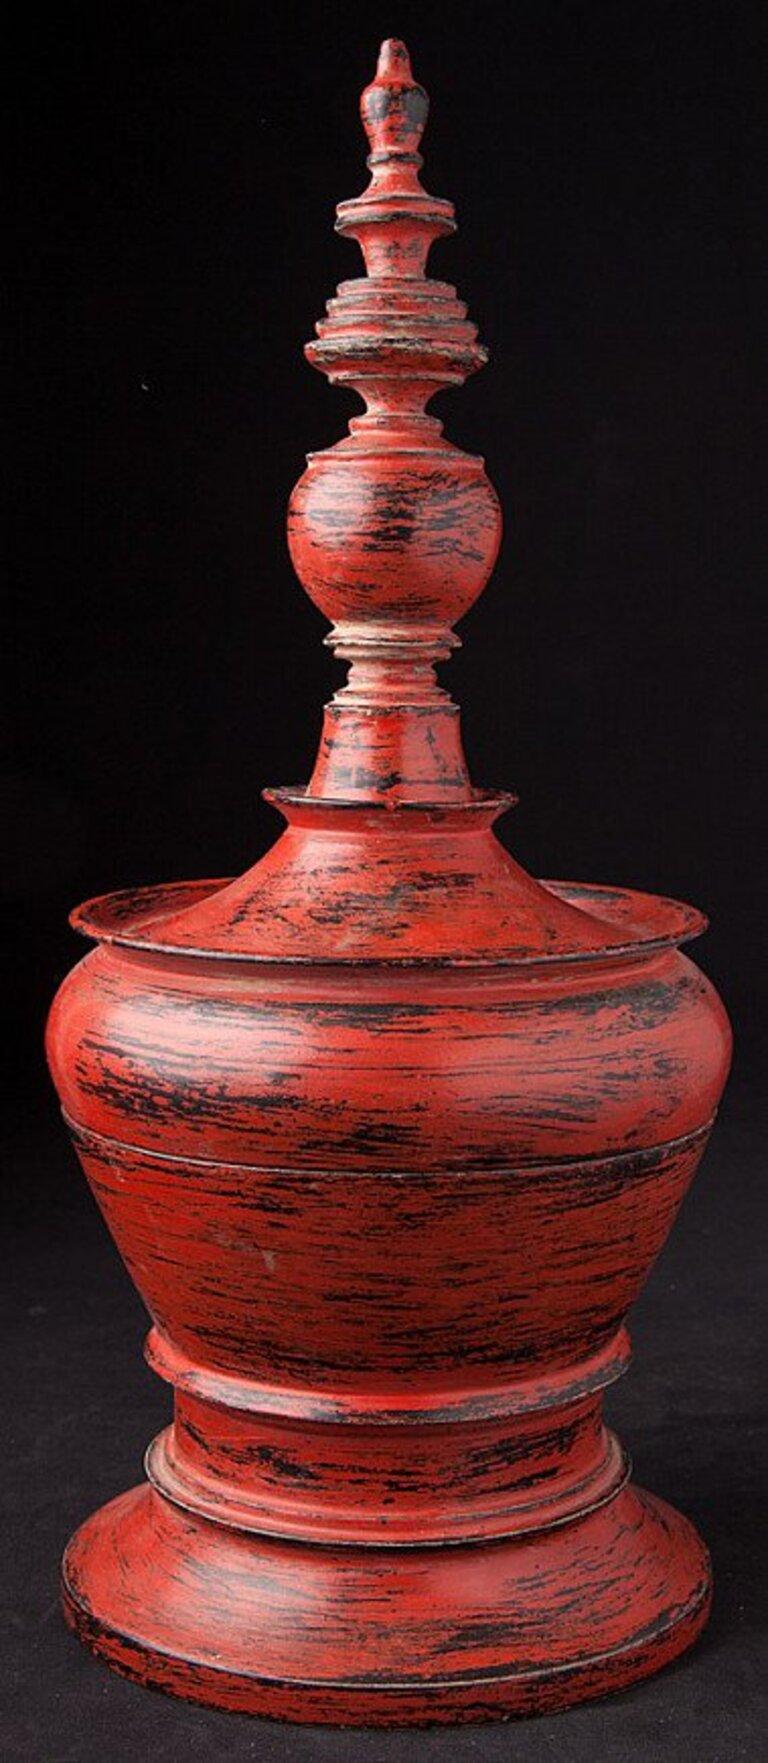 This antique lacquerware is a truly unique and special collectible piece. Standing at 66 cm high and with a diameter of 38 cm, it is made of lacquerware and it weighs 2.6 kgs. This statue is believed to originate from Burma, dating back to the late